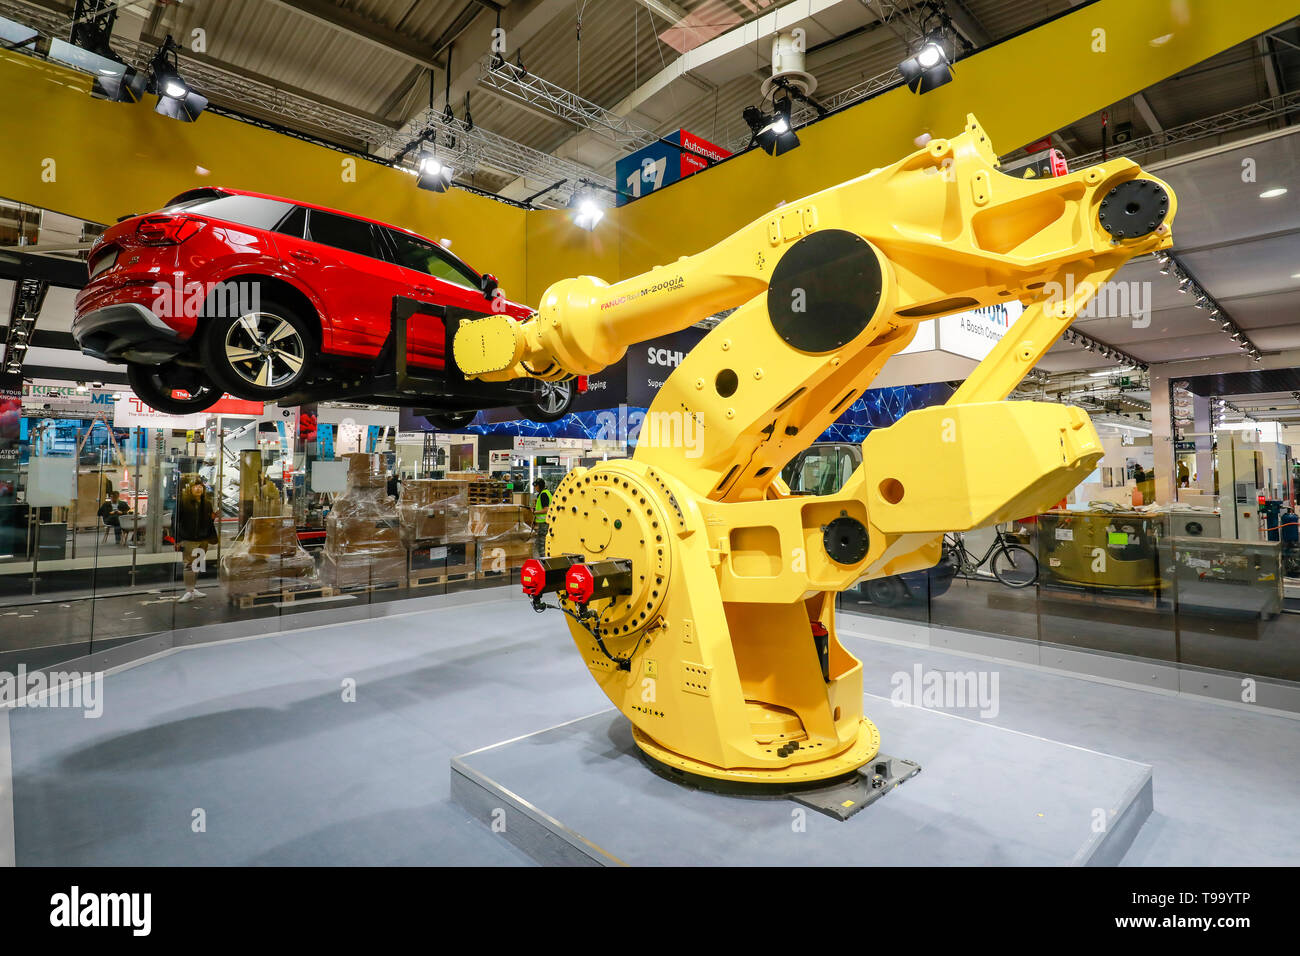 31.03.2019, Hannover, Lower Saxony, Germany - Hanover Fair, industrial robot  on the Fanuc booth lifts a car, here on the press highlight tour the day  Stock Photo - Alamy